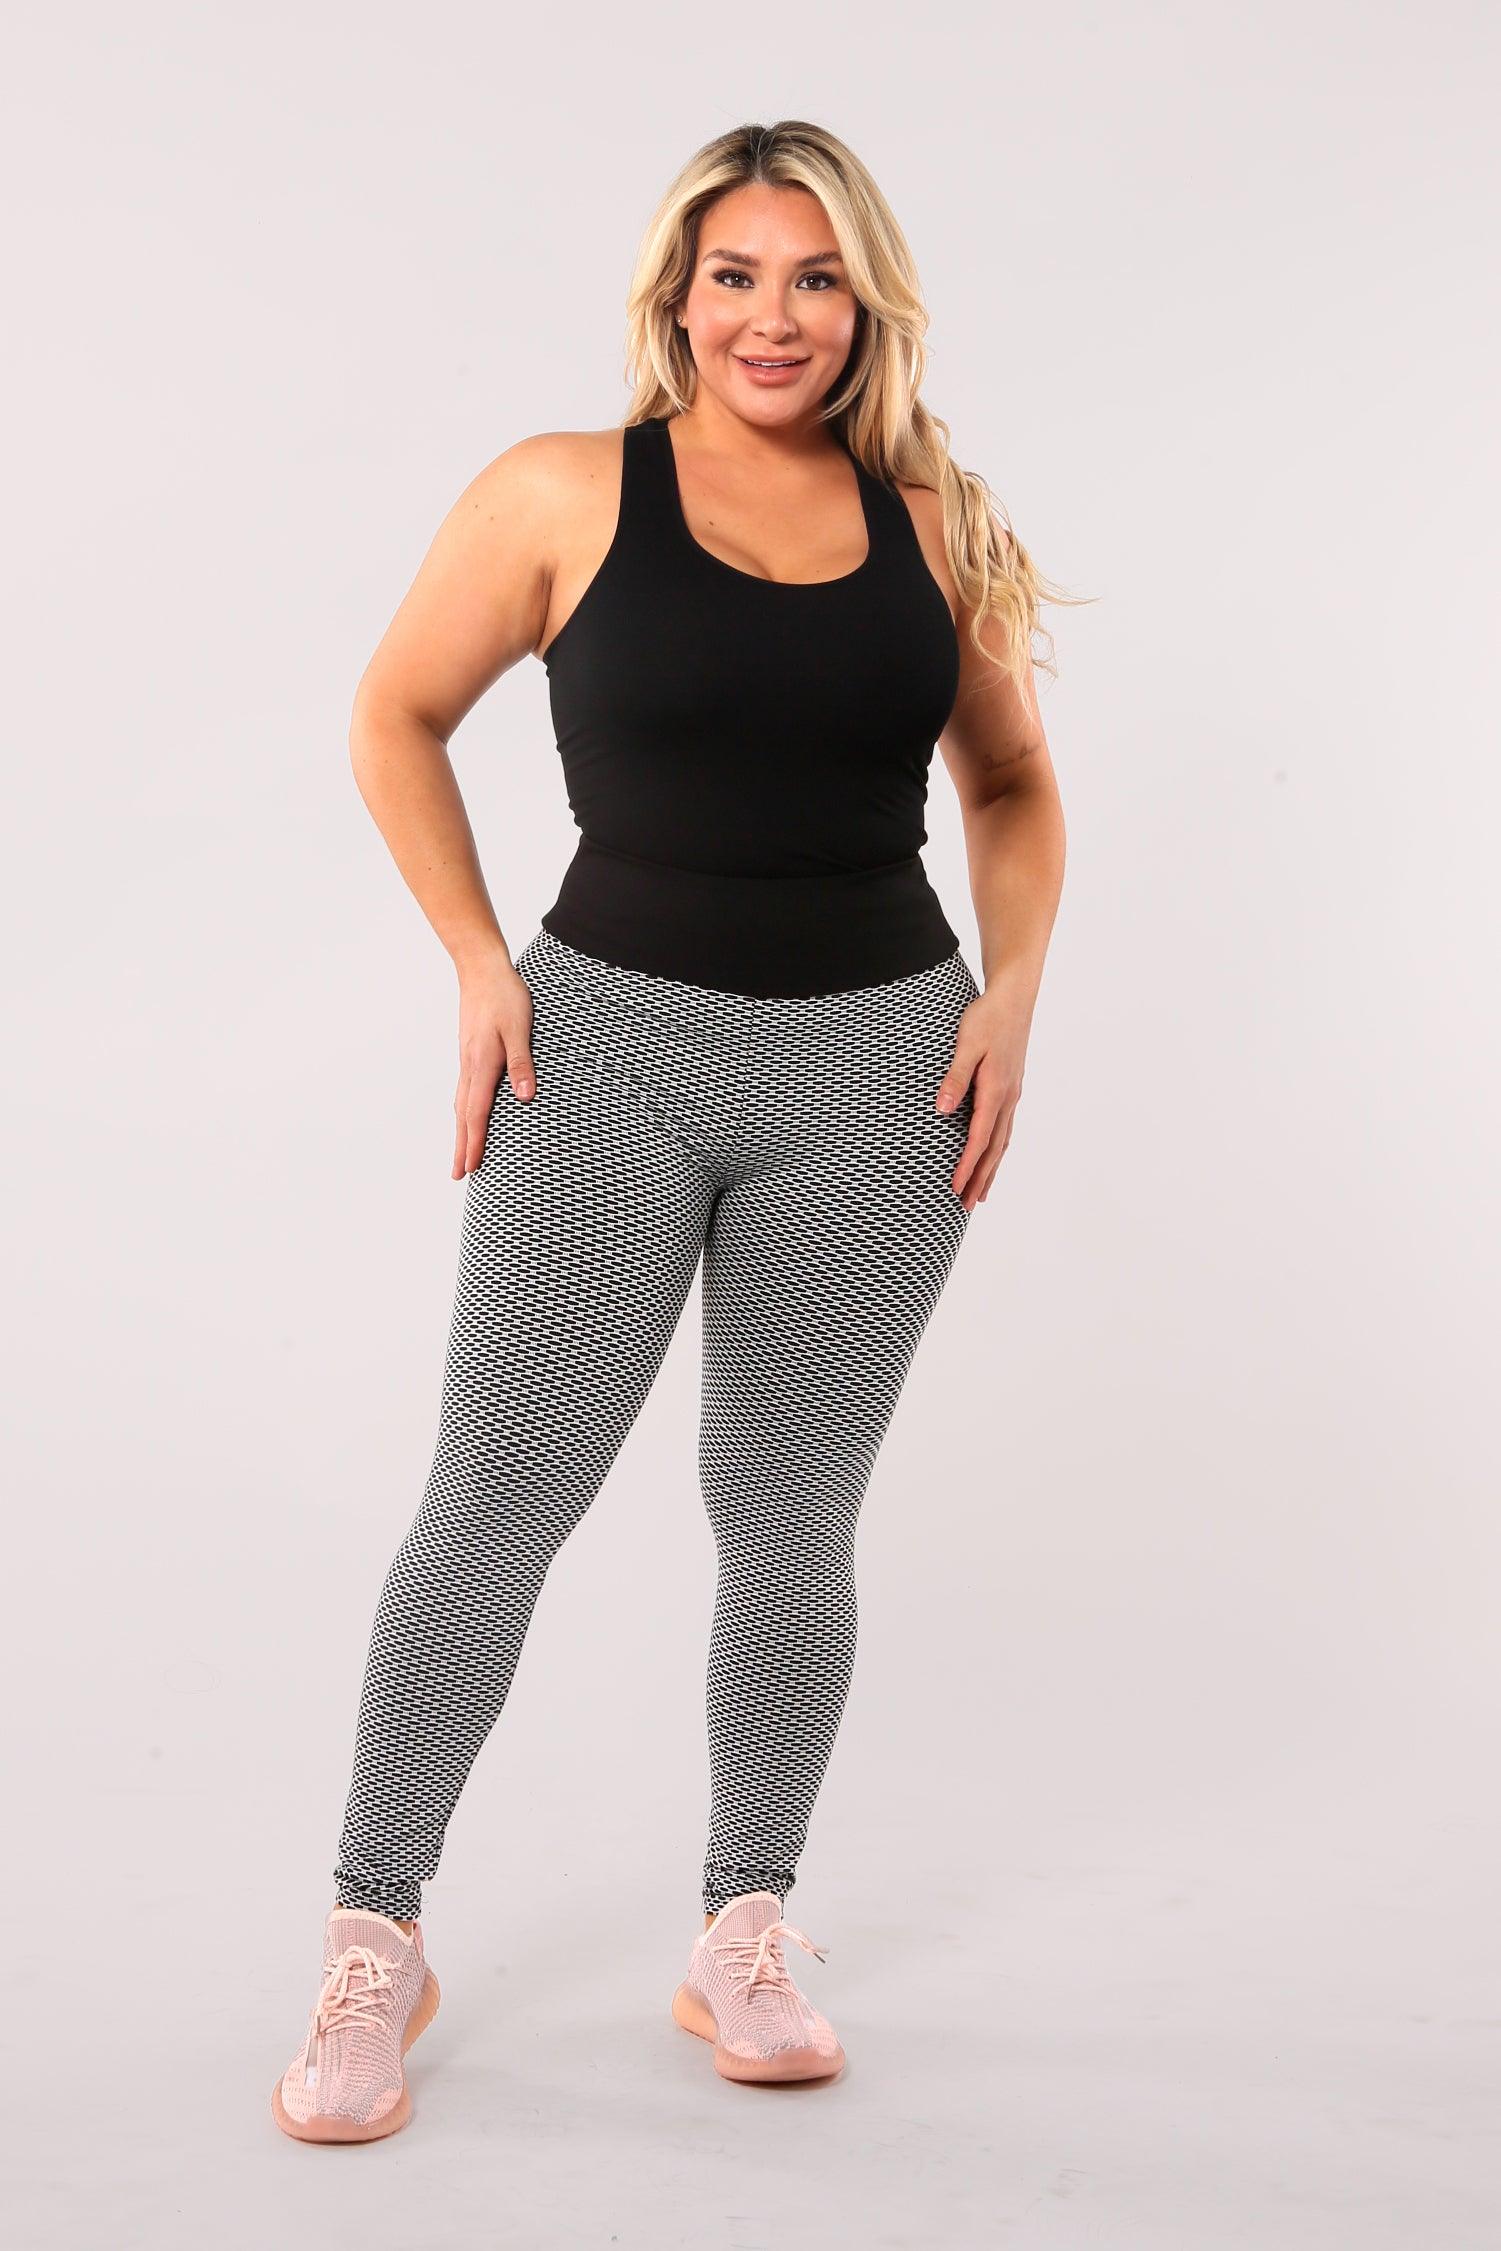 Buy Shosho Warm Womens Plus Size Fur Lined Leggings & Jeggings Thick  Thermal Solid Jeggings Bottoms Black 3X at